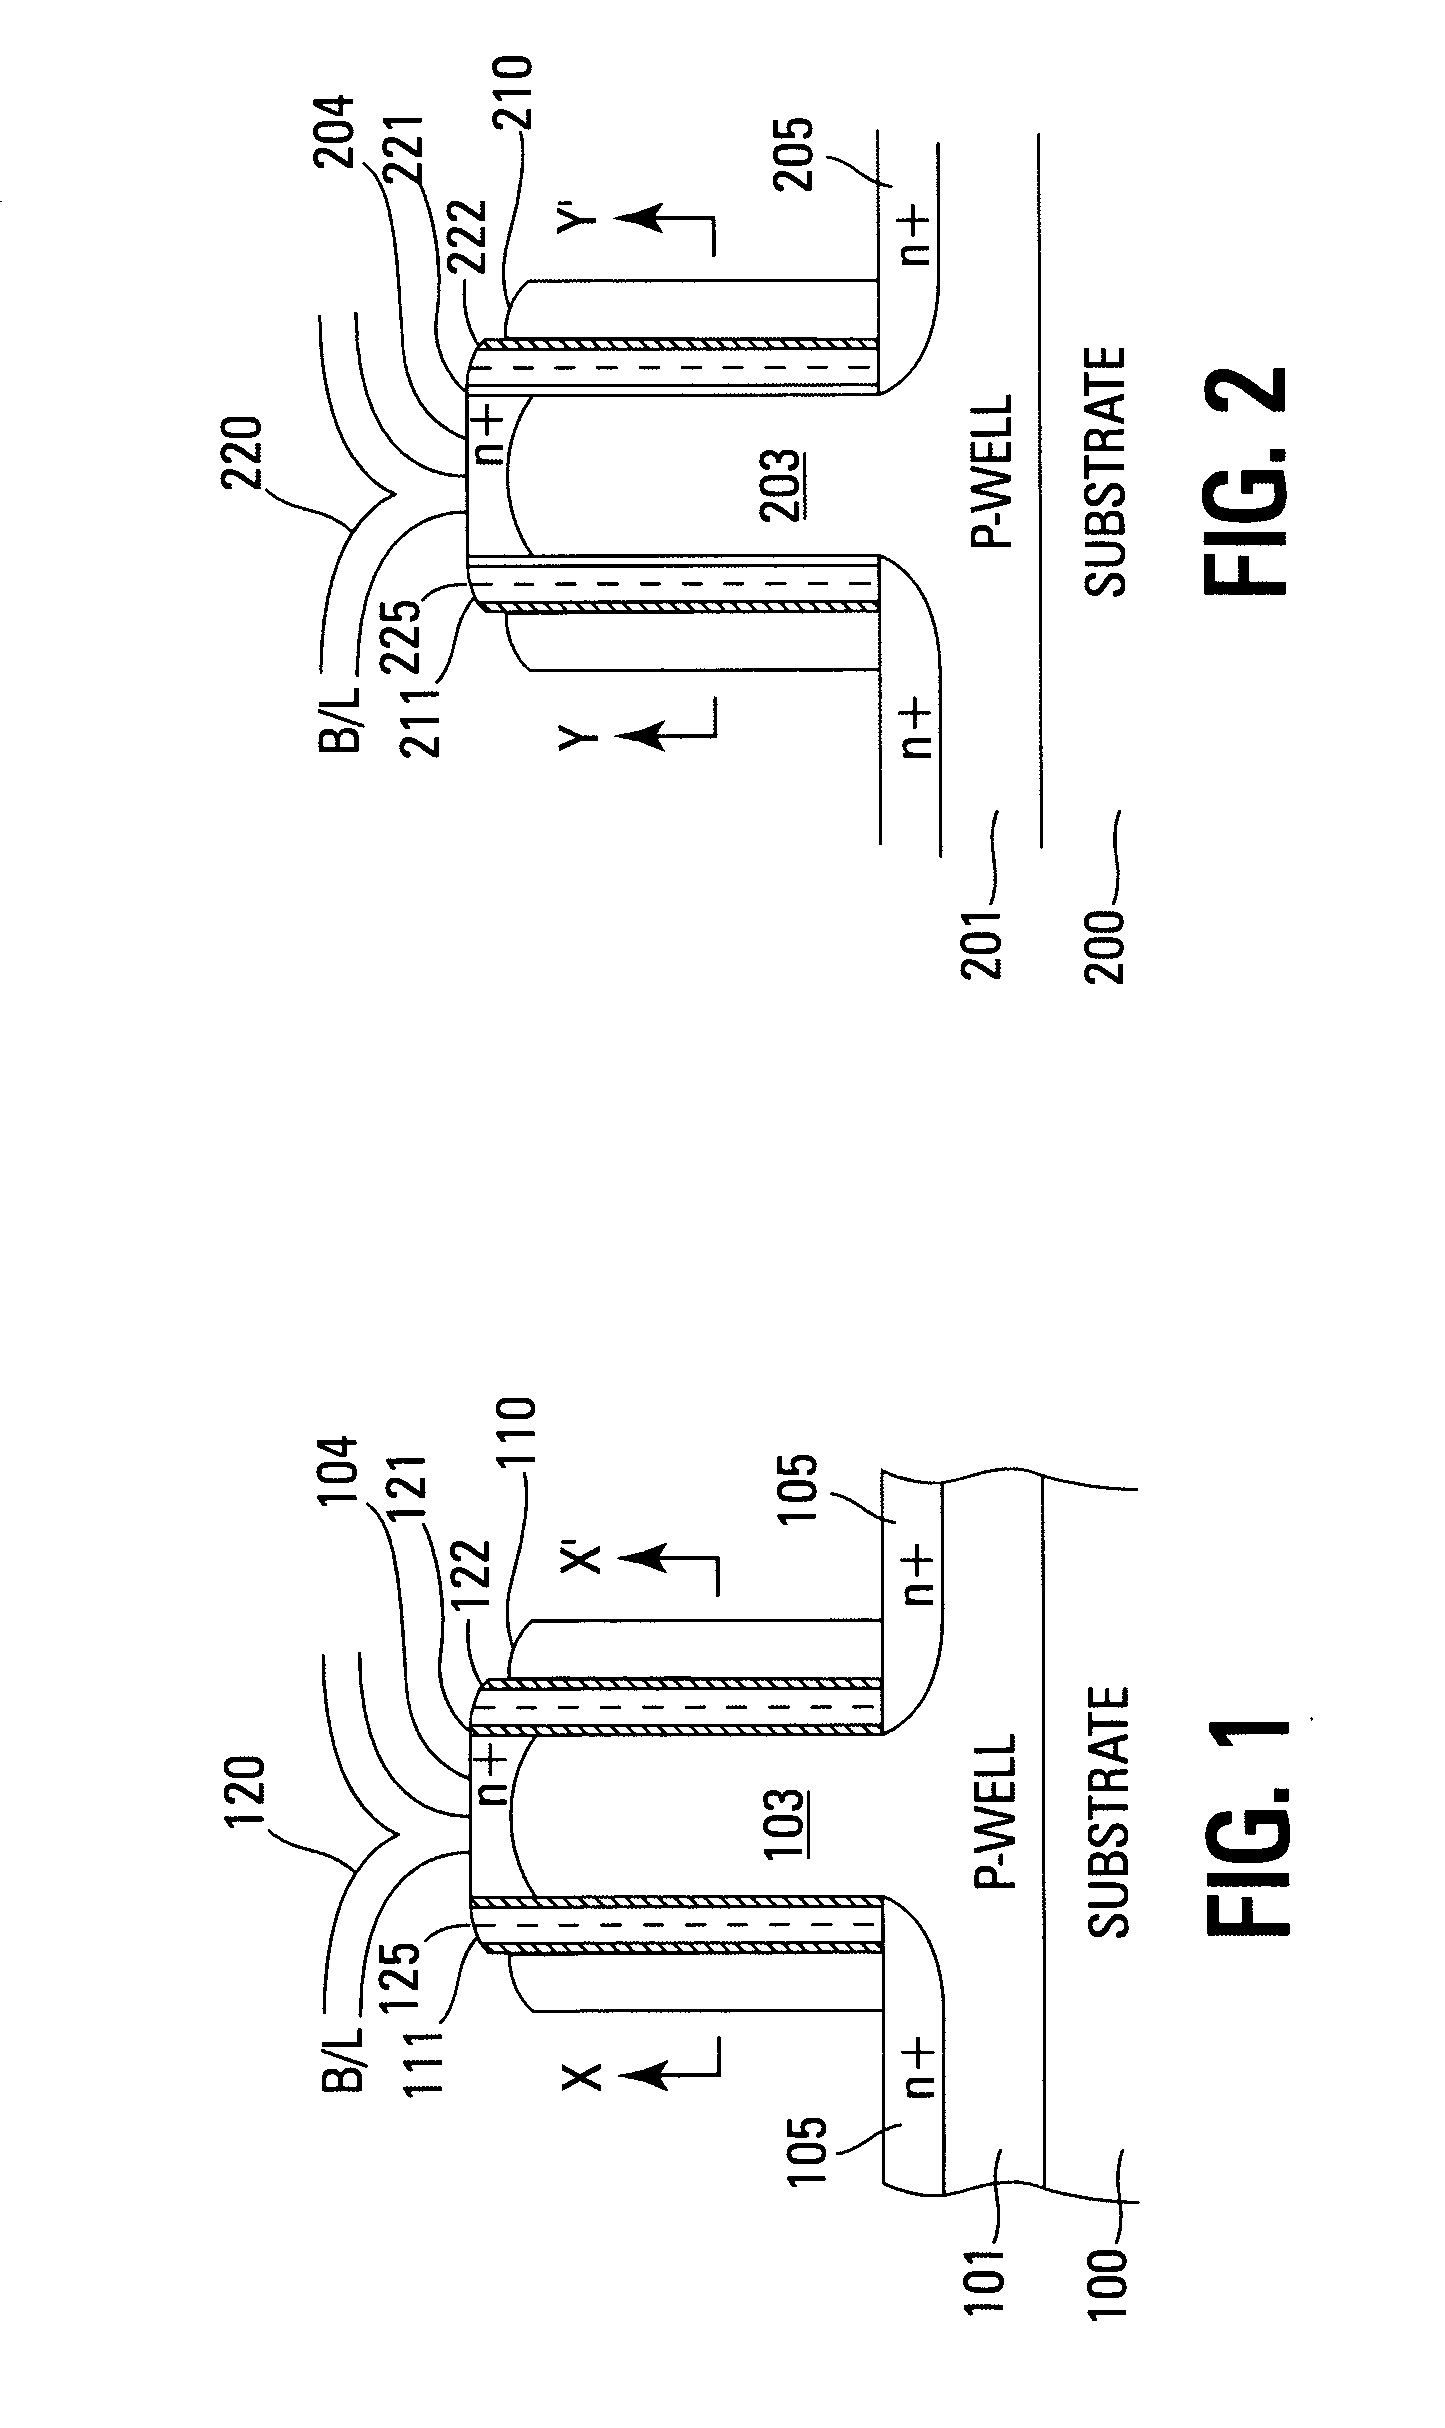 Integrated surround gate multifunctional memory device